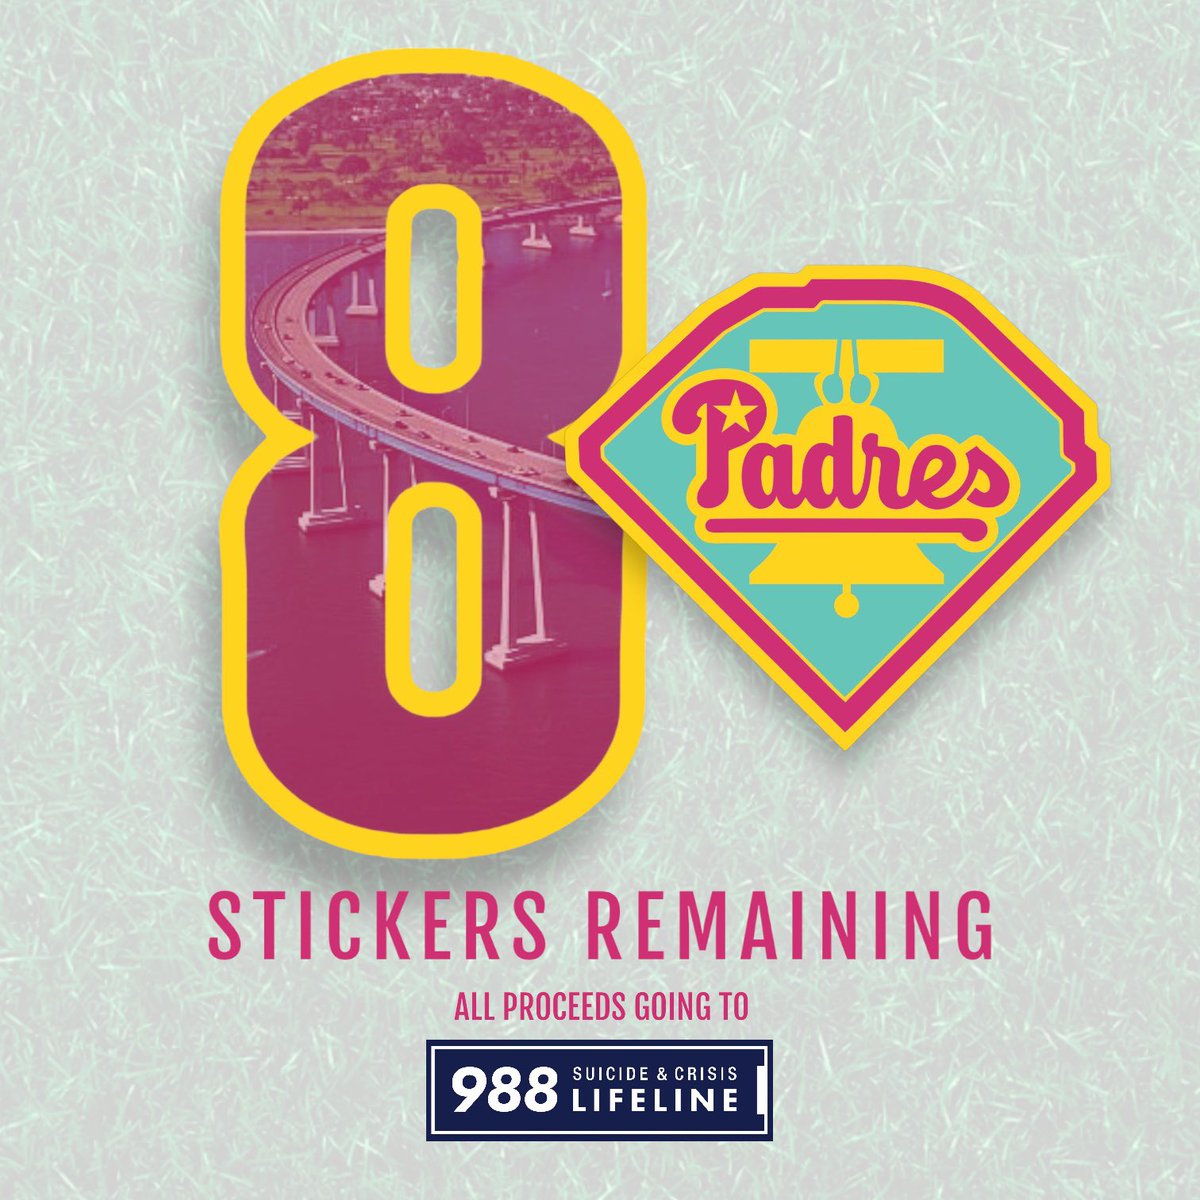 8 stickers remaining, All proceeds going to 988 Suicide and Crisis Lifeline. DM if Interested. #padres #friars #sandiego #friarfaithful #stickers #PadresST #machado #tatisjr #bogaerts